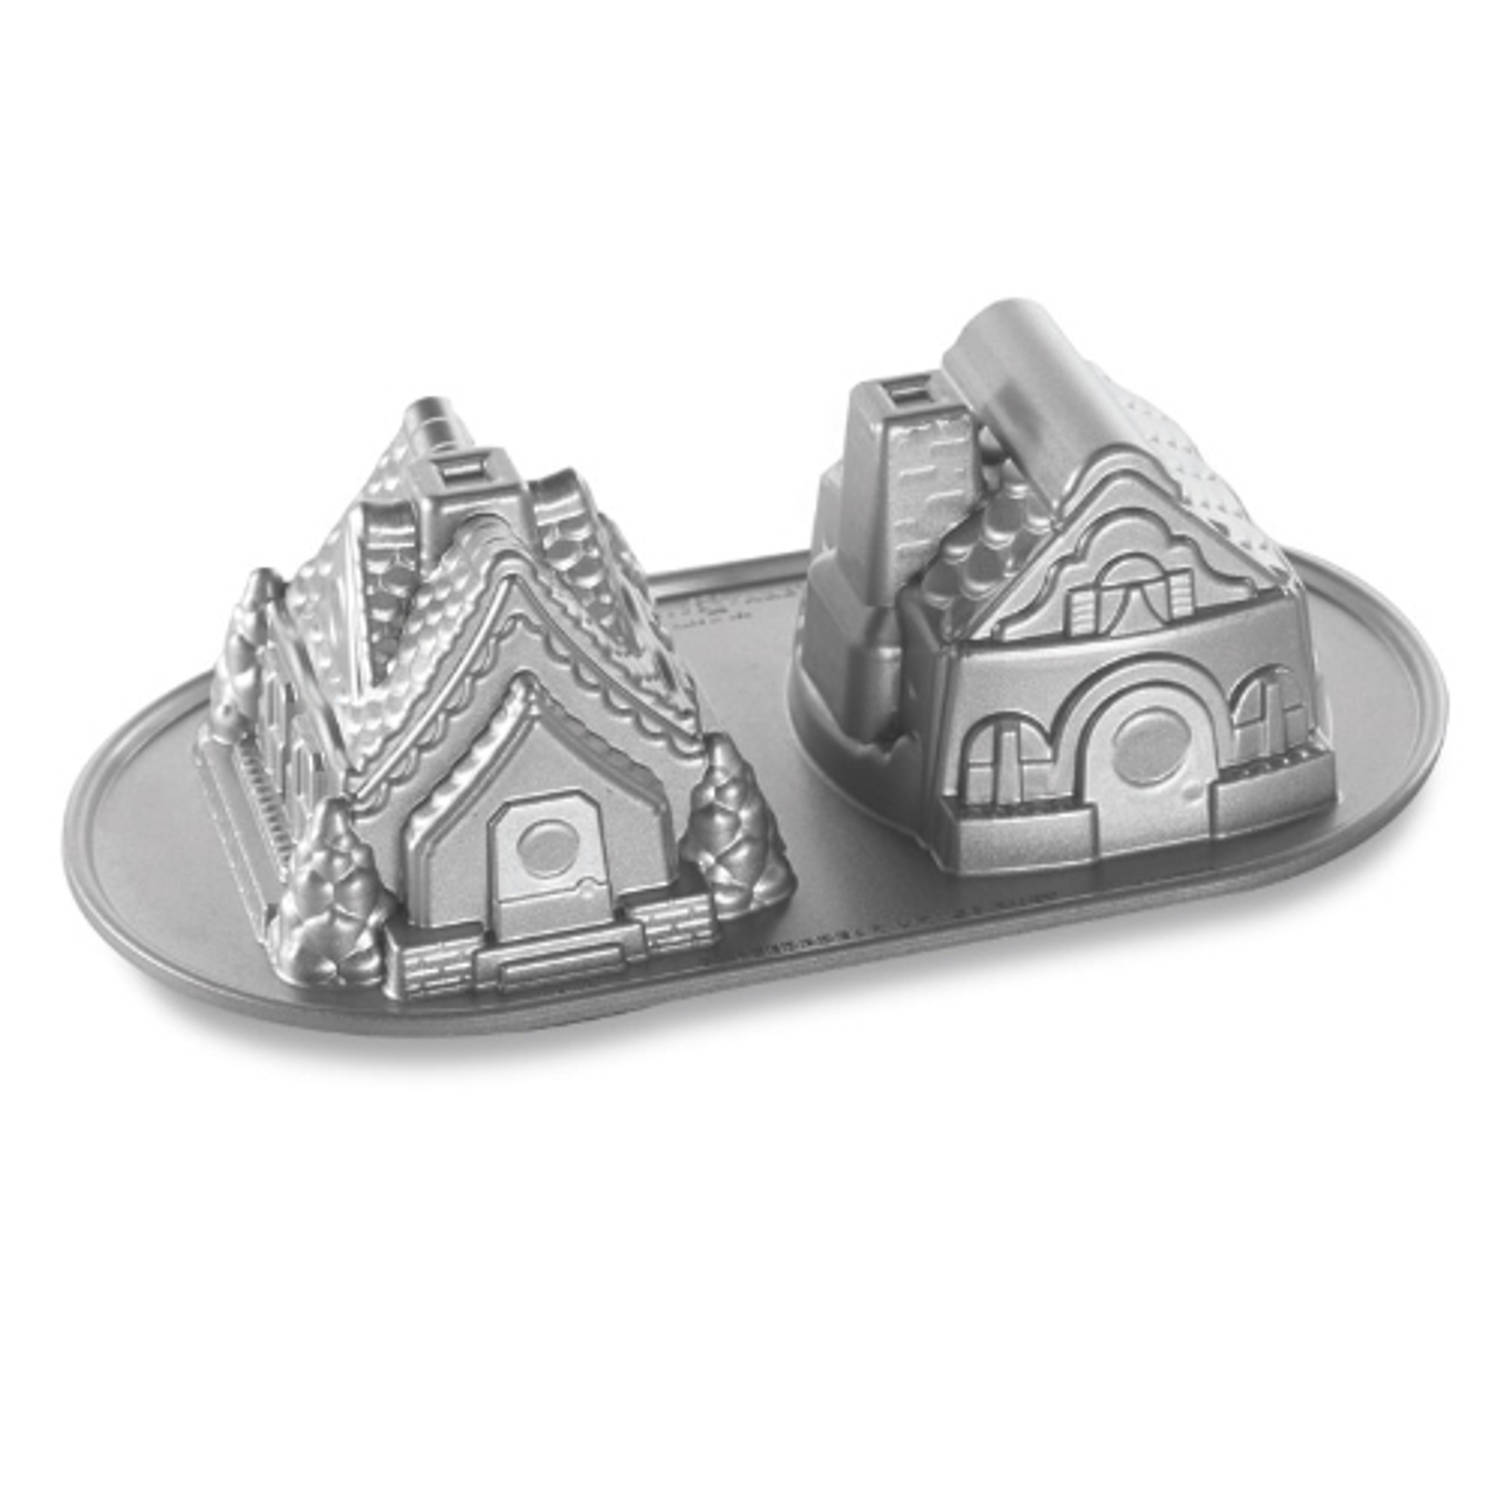 Nordic Ware - Bakvorm ""Gingerbread House Duet Pan"" - Nordic Ware Sparkling Silver Holiday